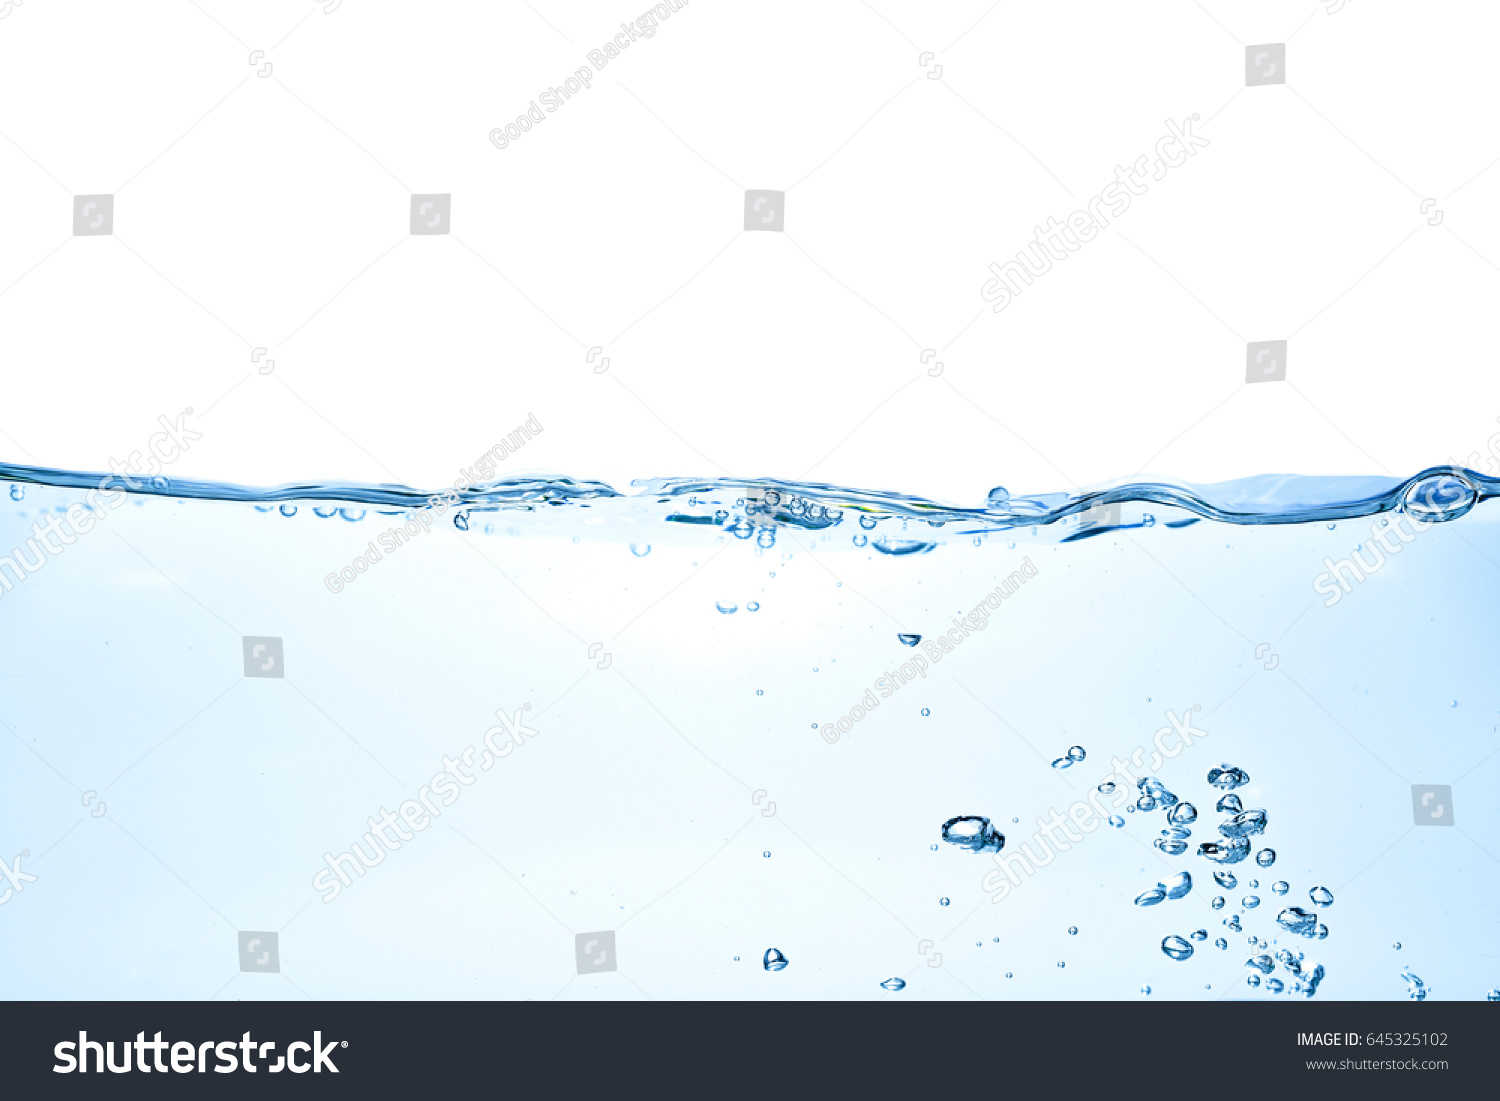 Clear water waves. Water wave isolated on white background #645325102